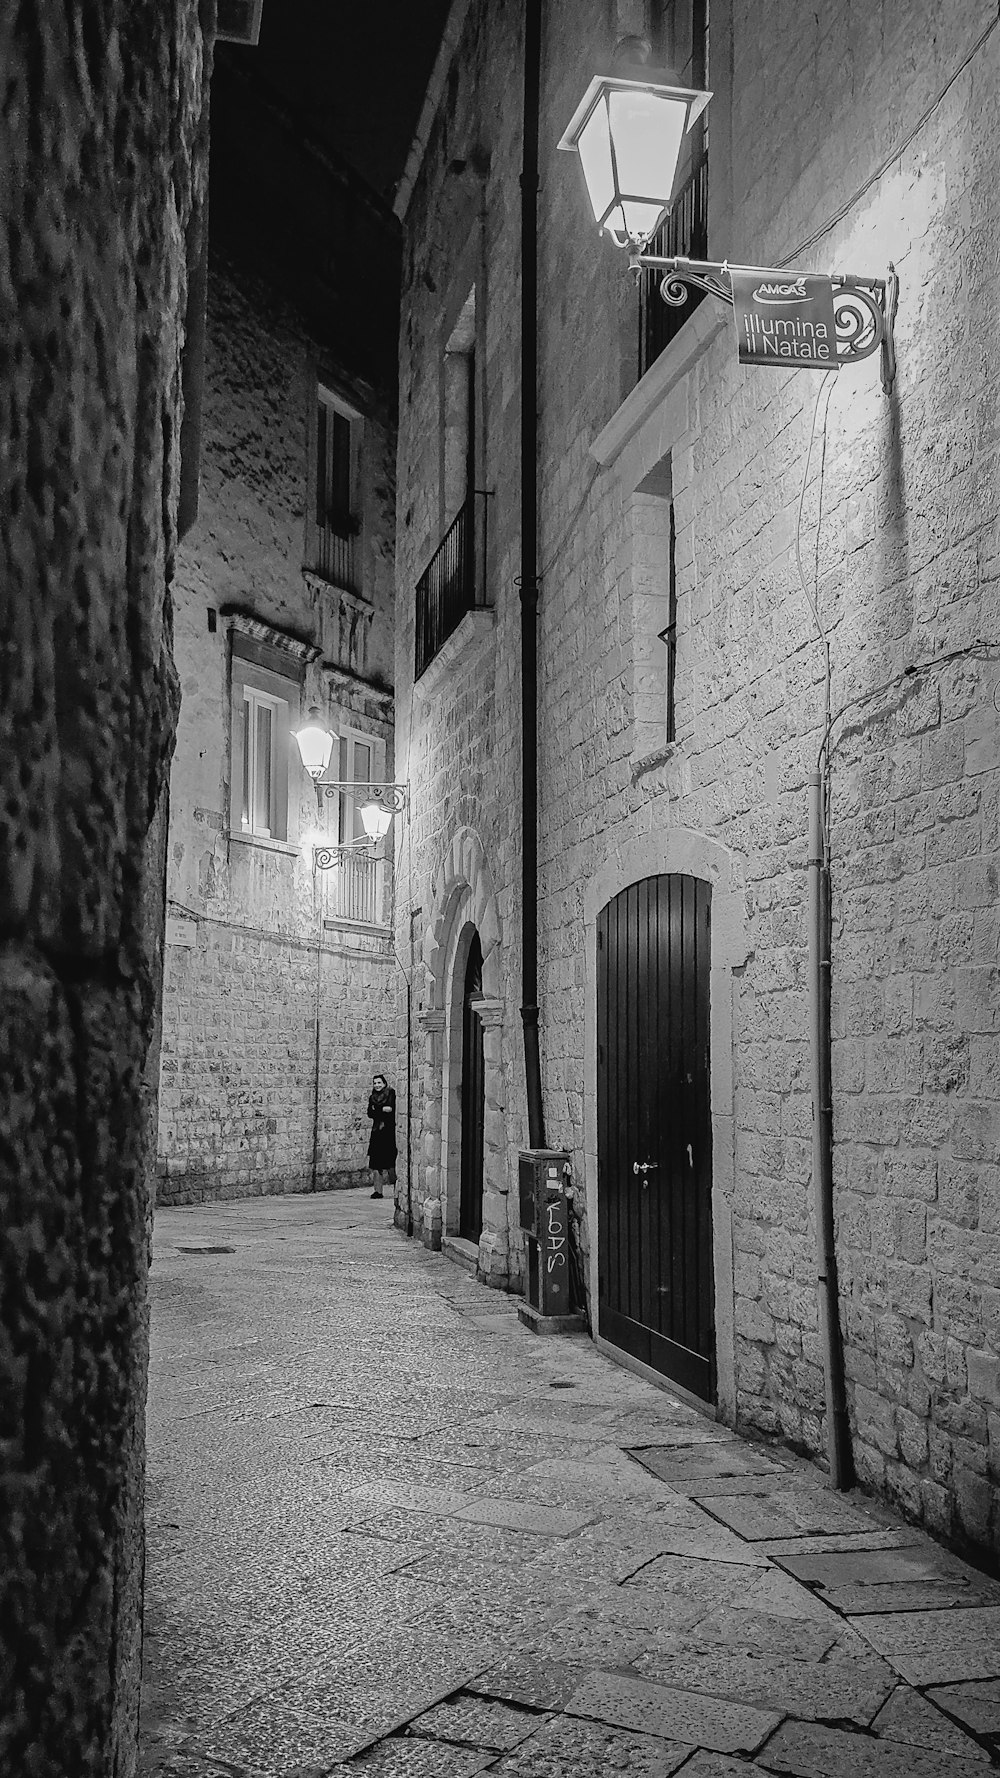 a black and white photo of a street at night